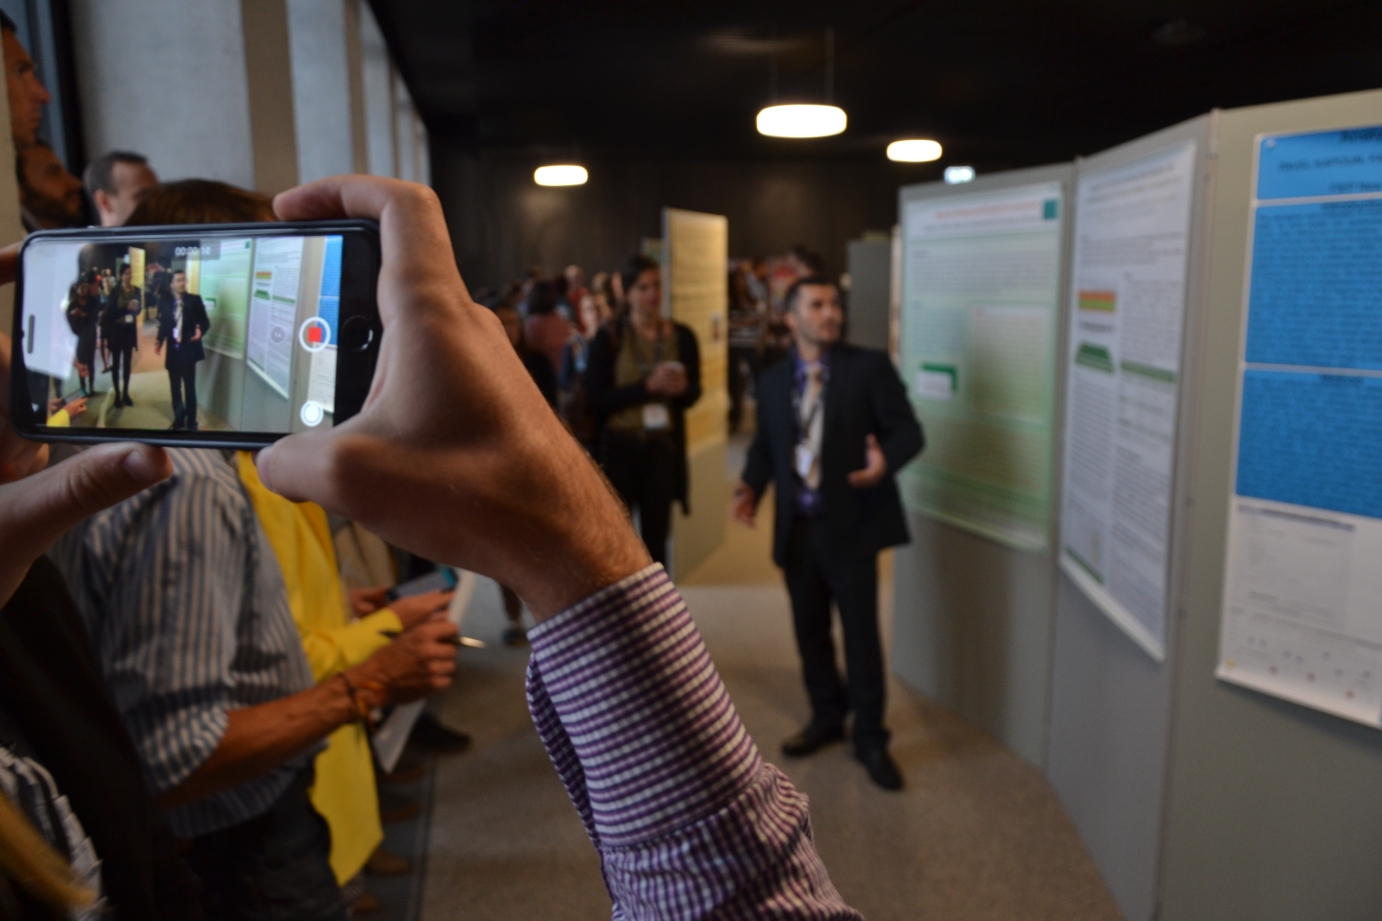 Stefan Kolimechkov from the National Sports Academy presenting a poster at a European Congress